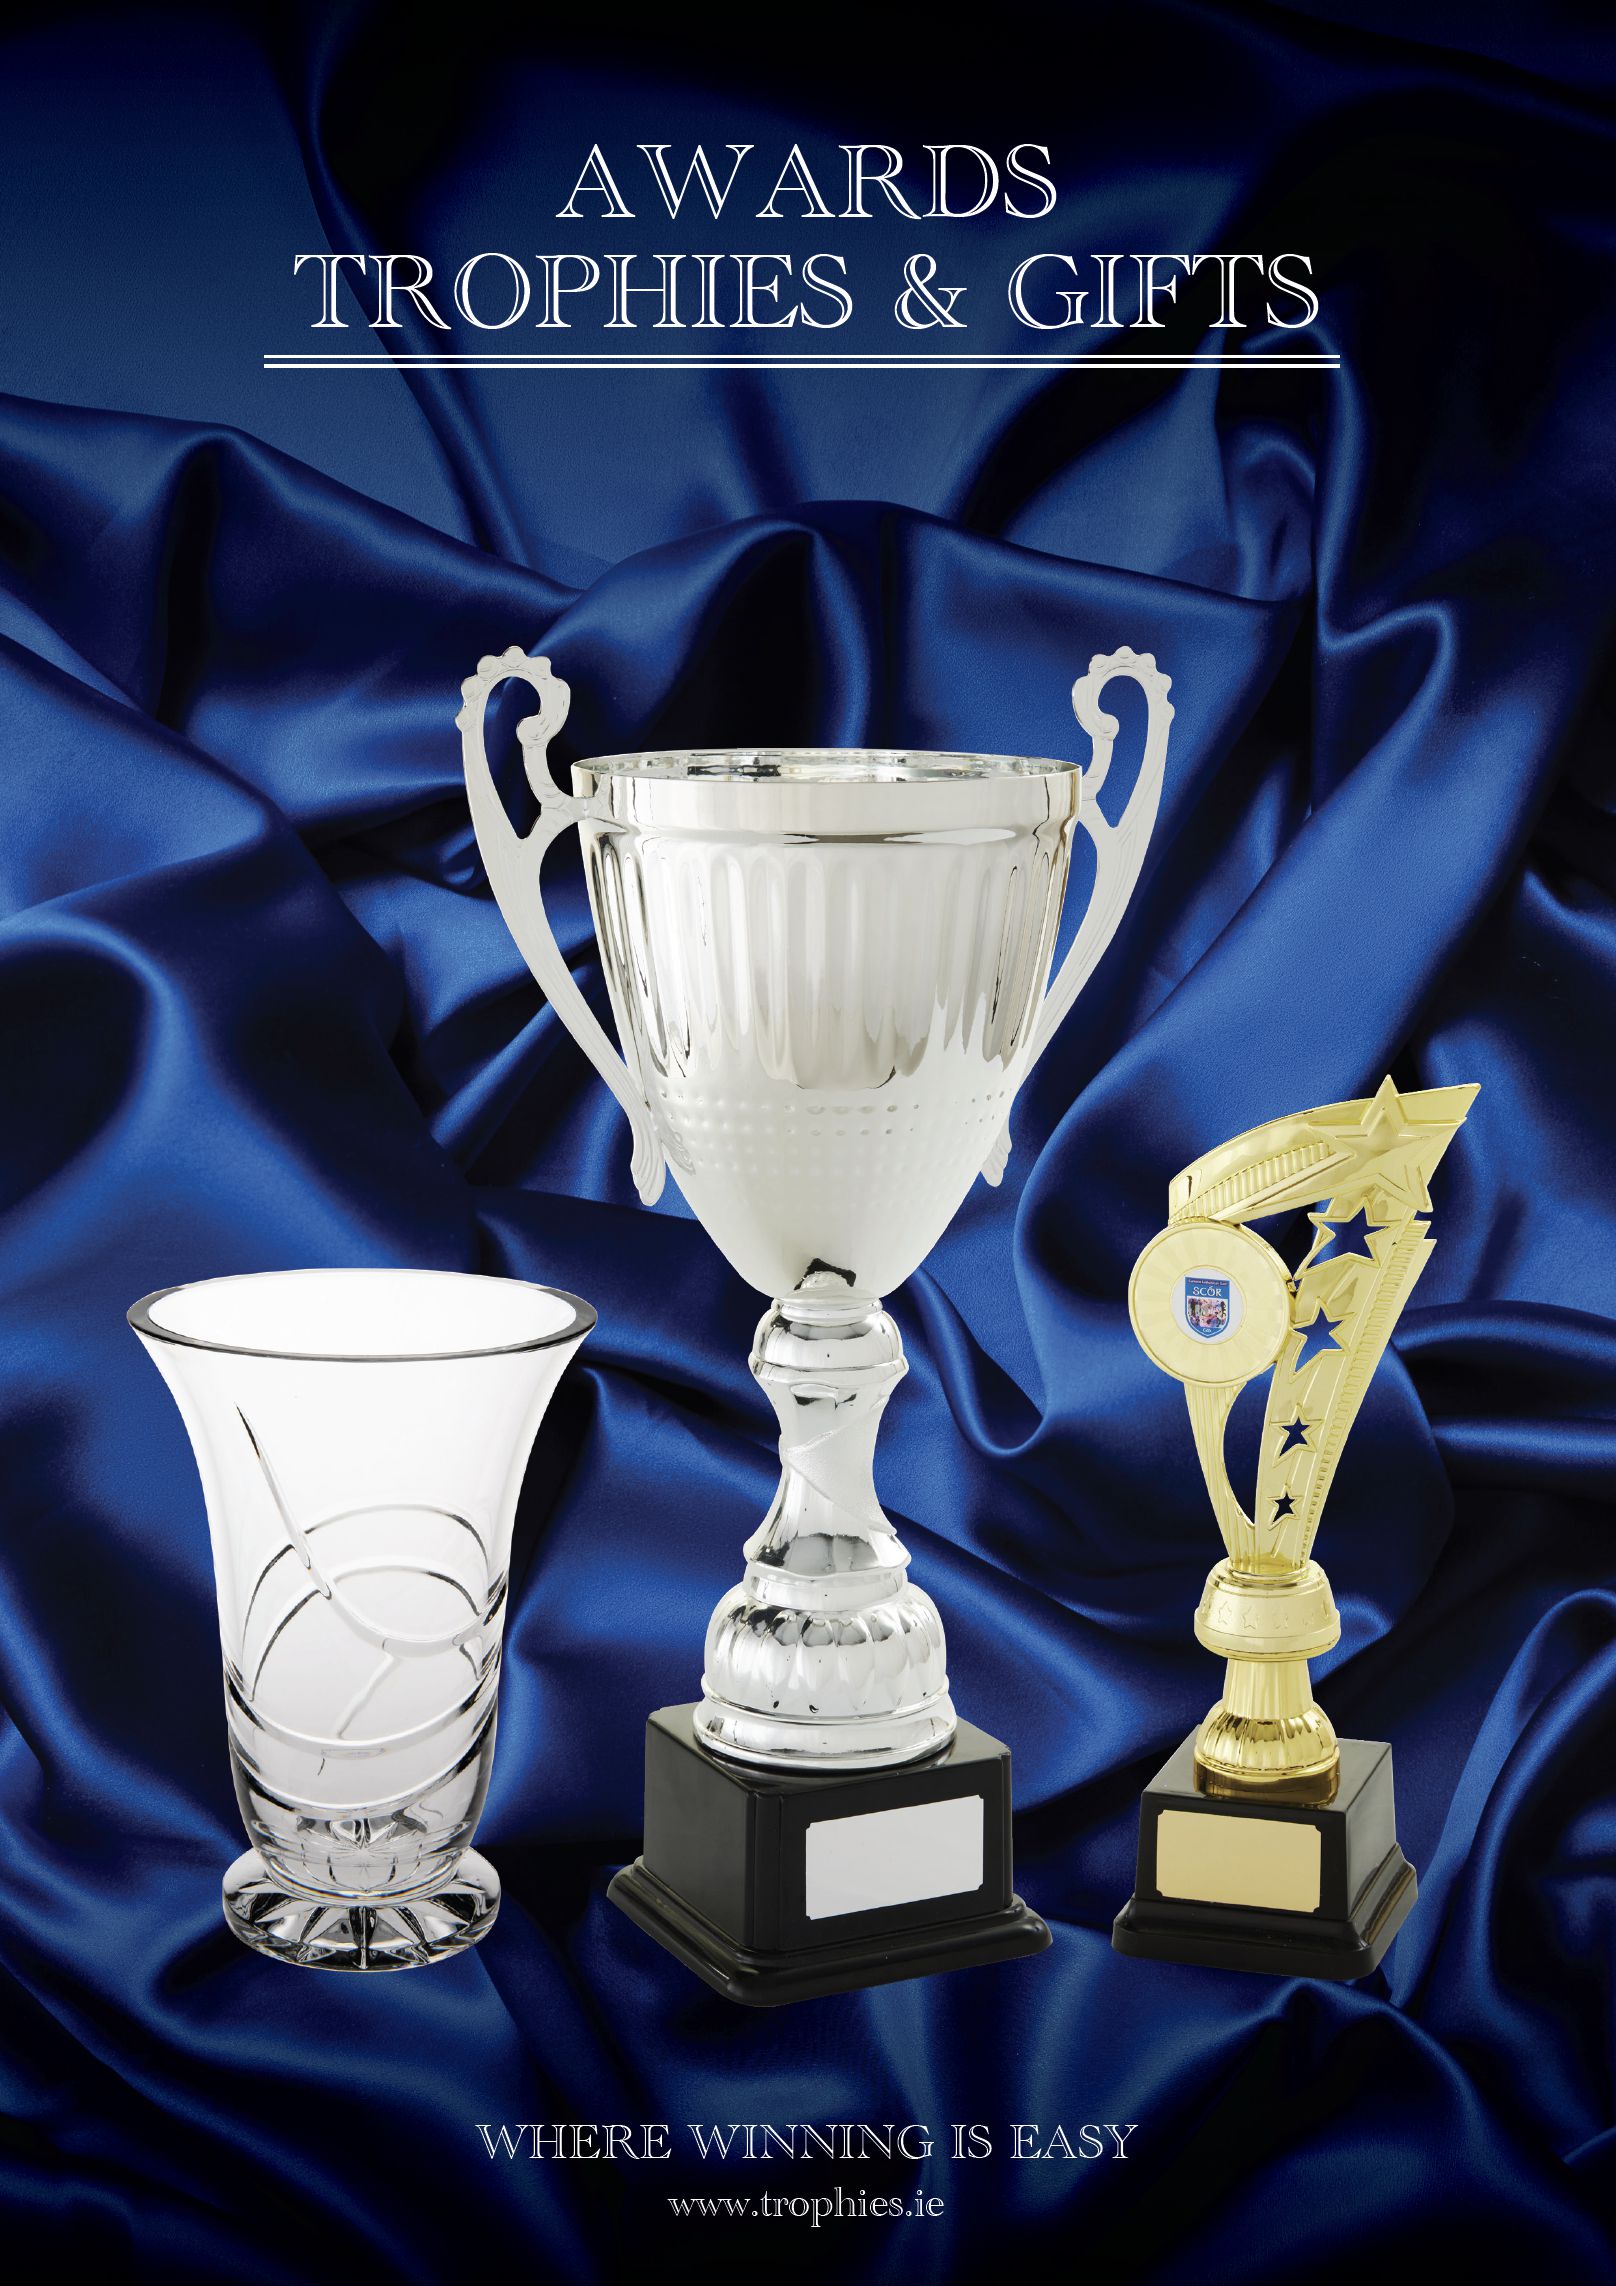 Awards Trophies & Gifts